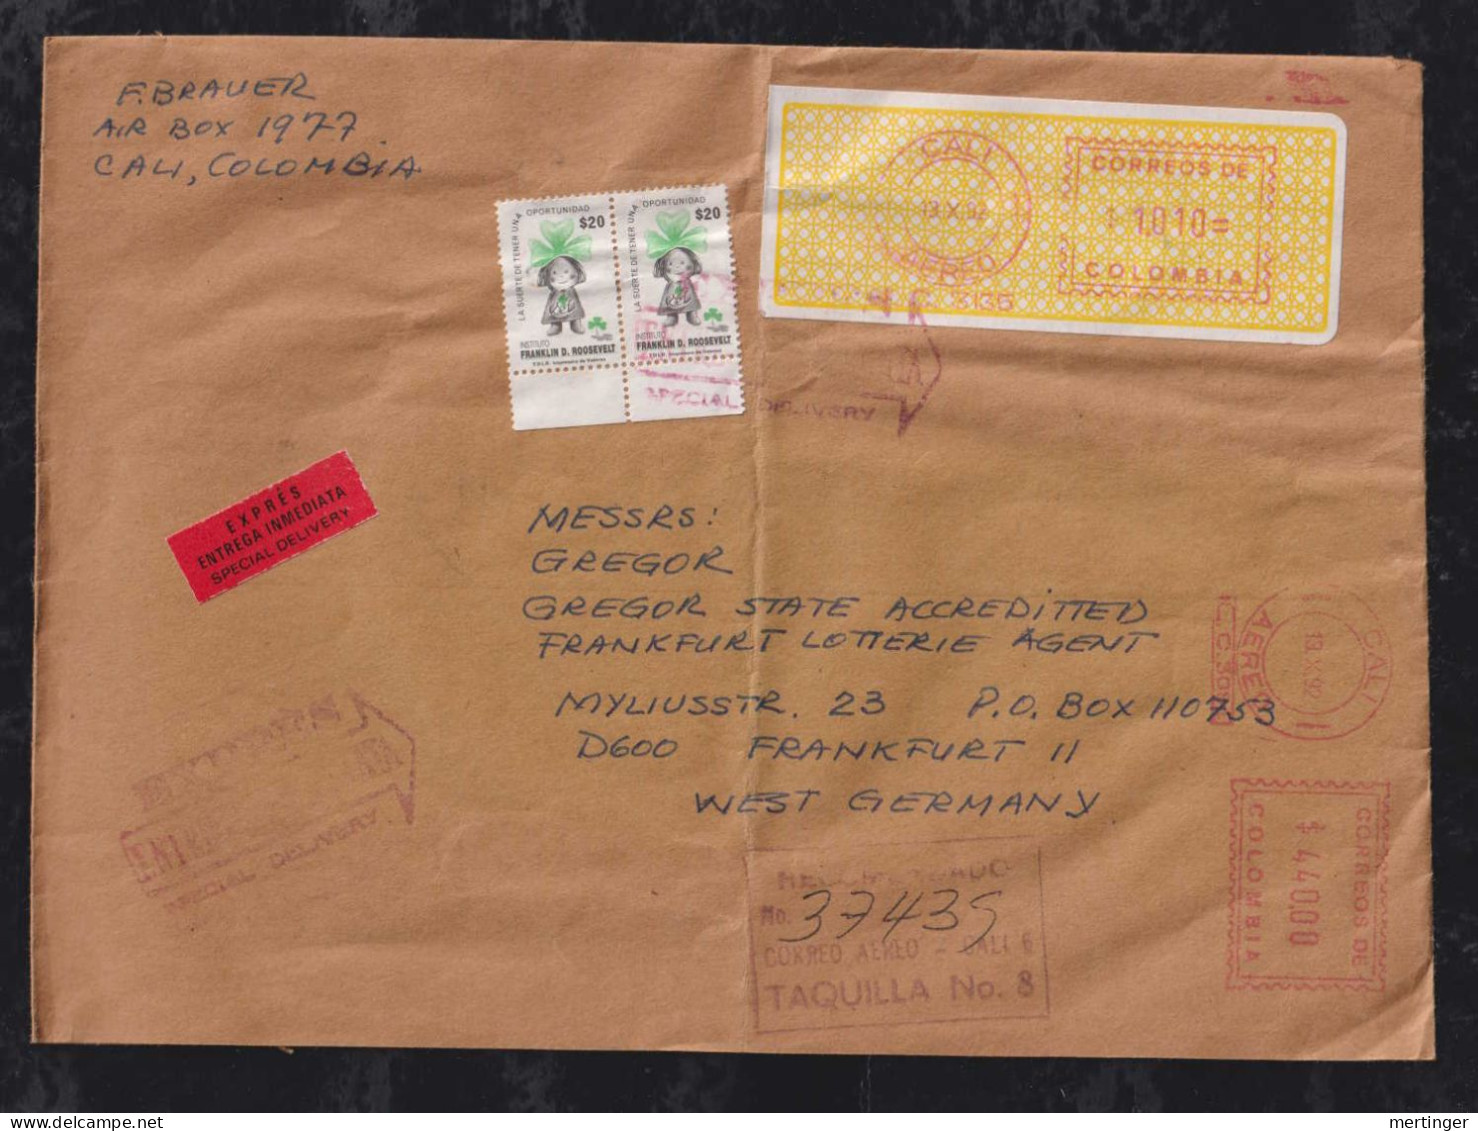 Colombia 1992 Meter Label Express Big Size Airmail Cover CALI X FRANKFURT Germany Cild Care Cinderella - Colombia